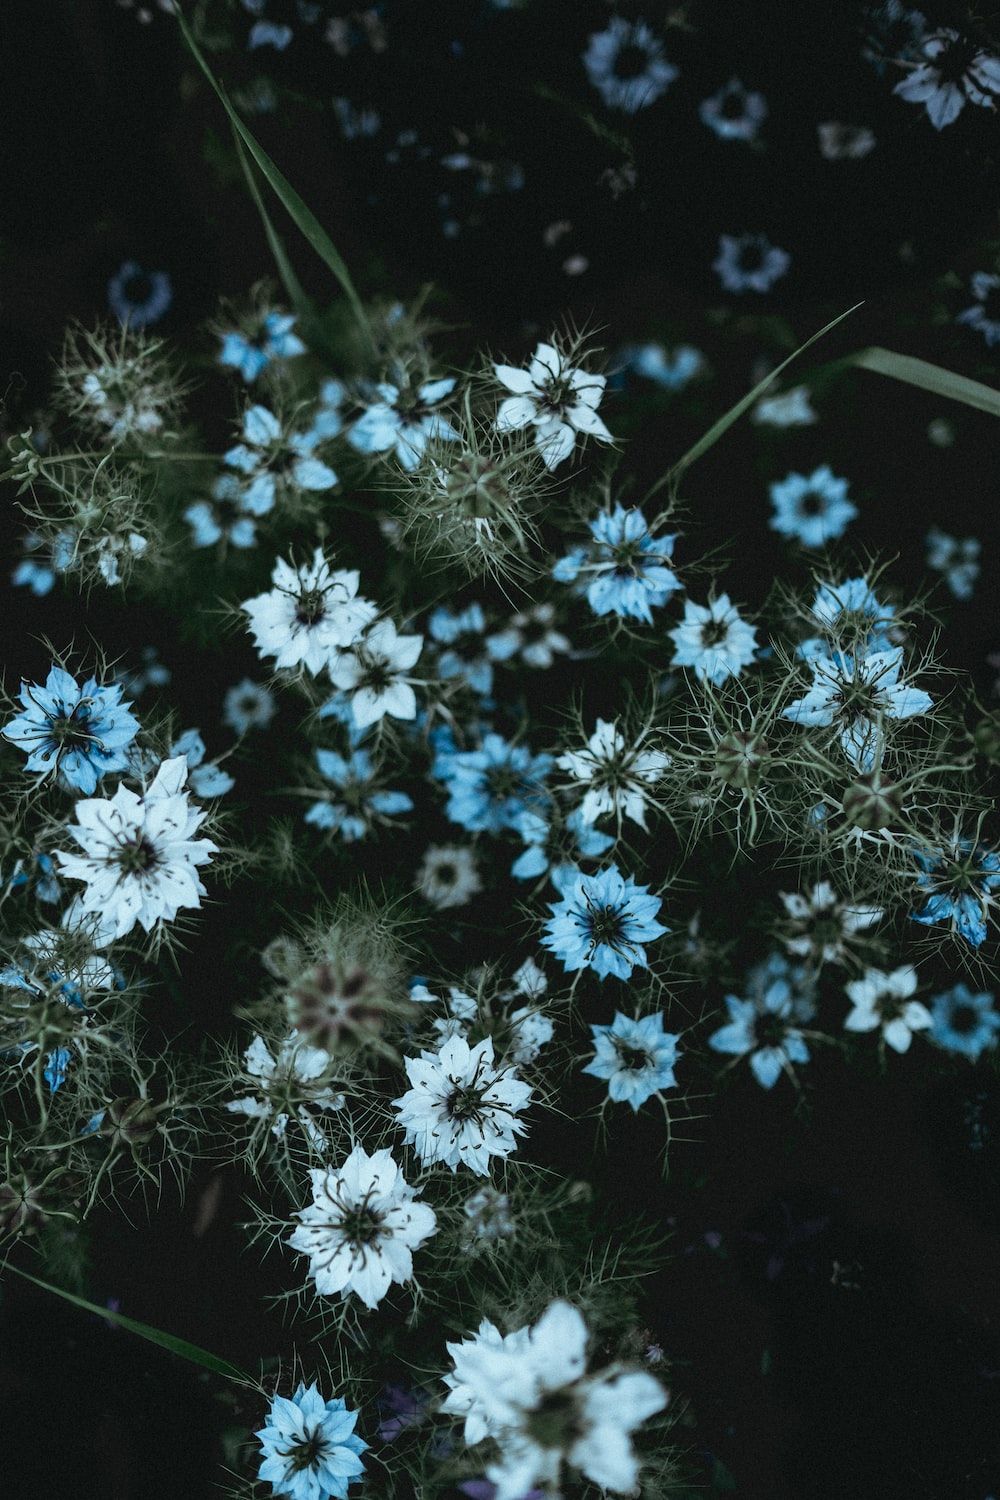 A field of blue flowers with green stems. - Nature